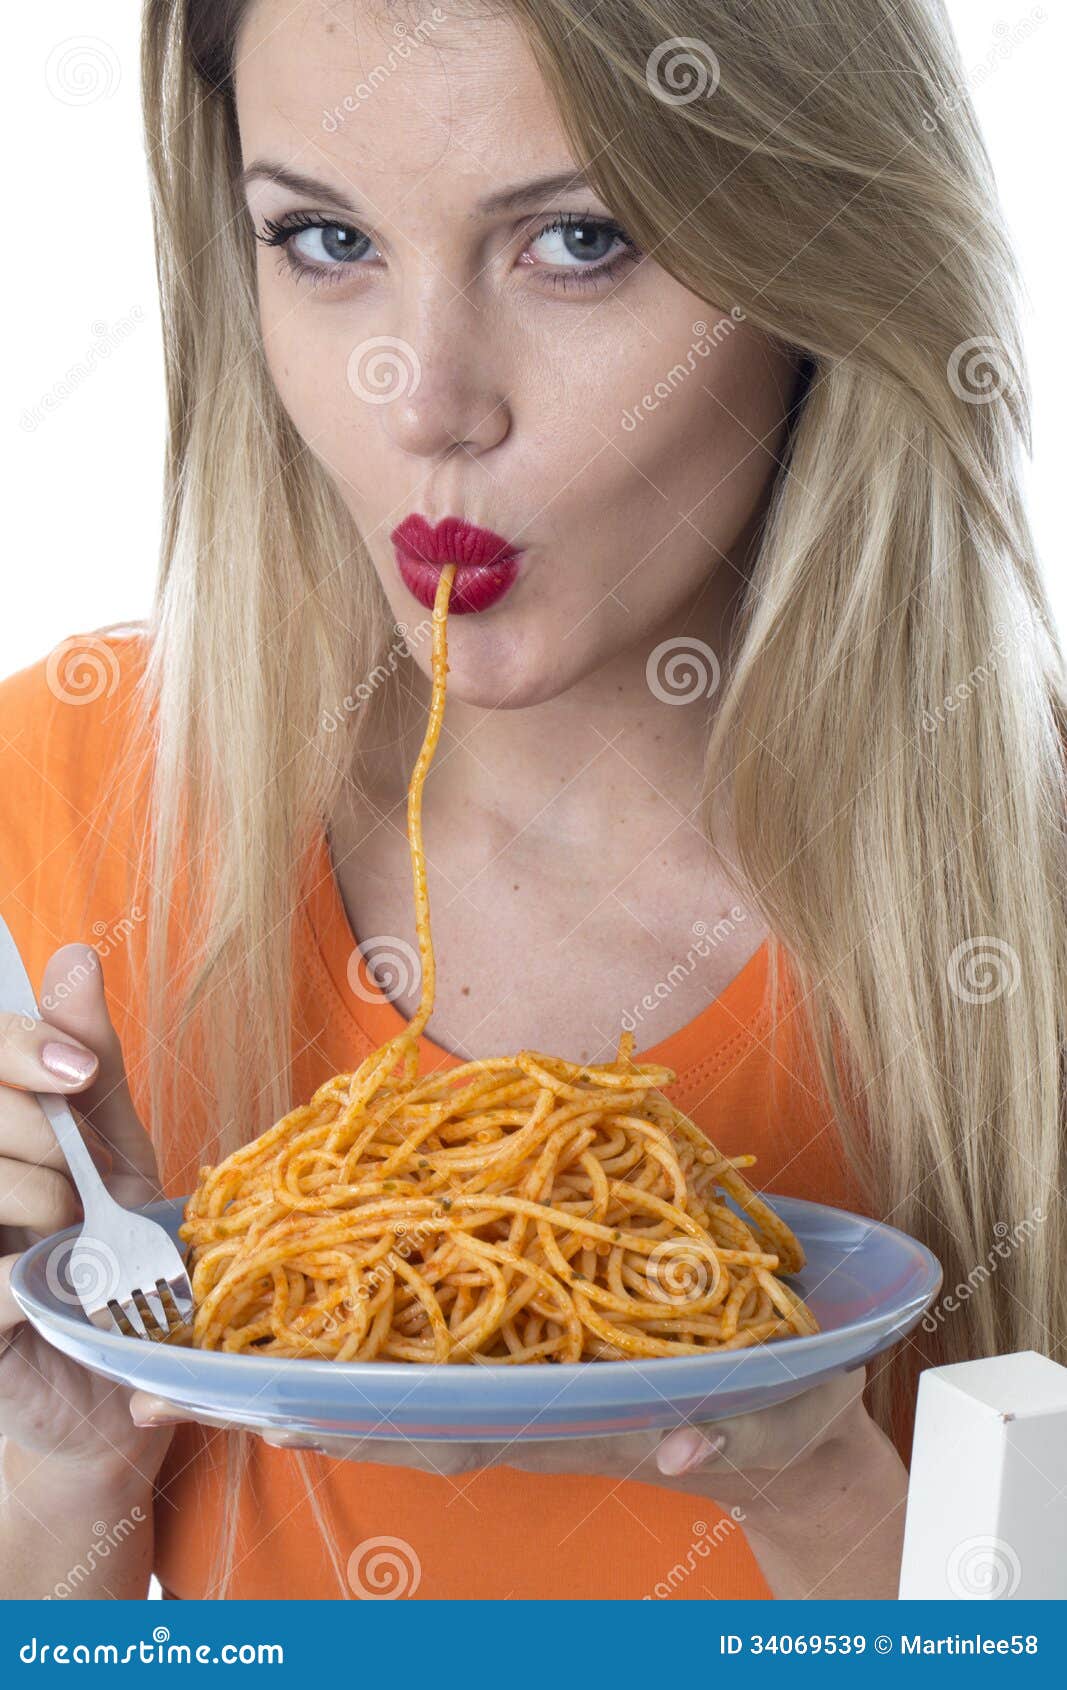 young-woman-eating-spaghetti-pasta-model-released-attractive-34069539.jpg